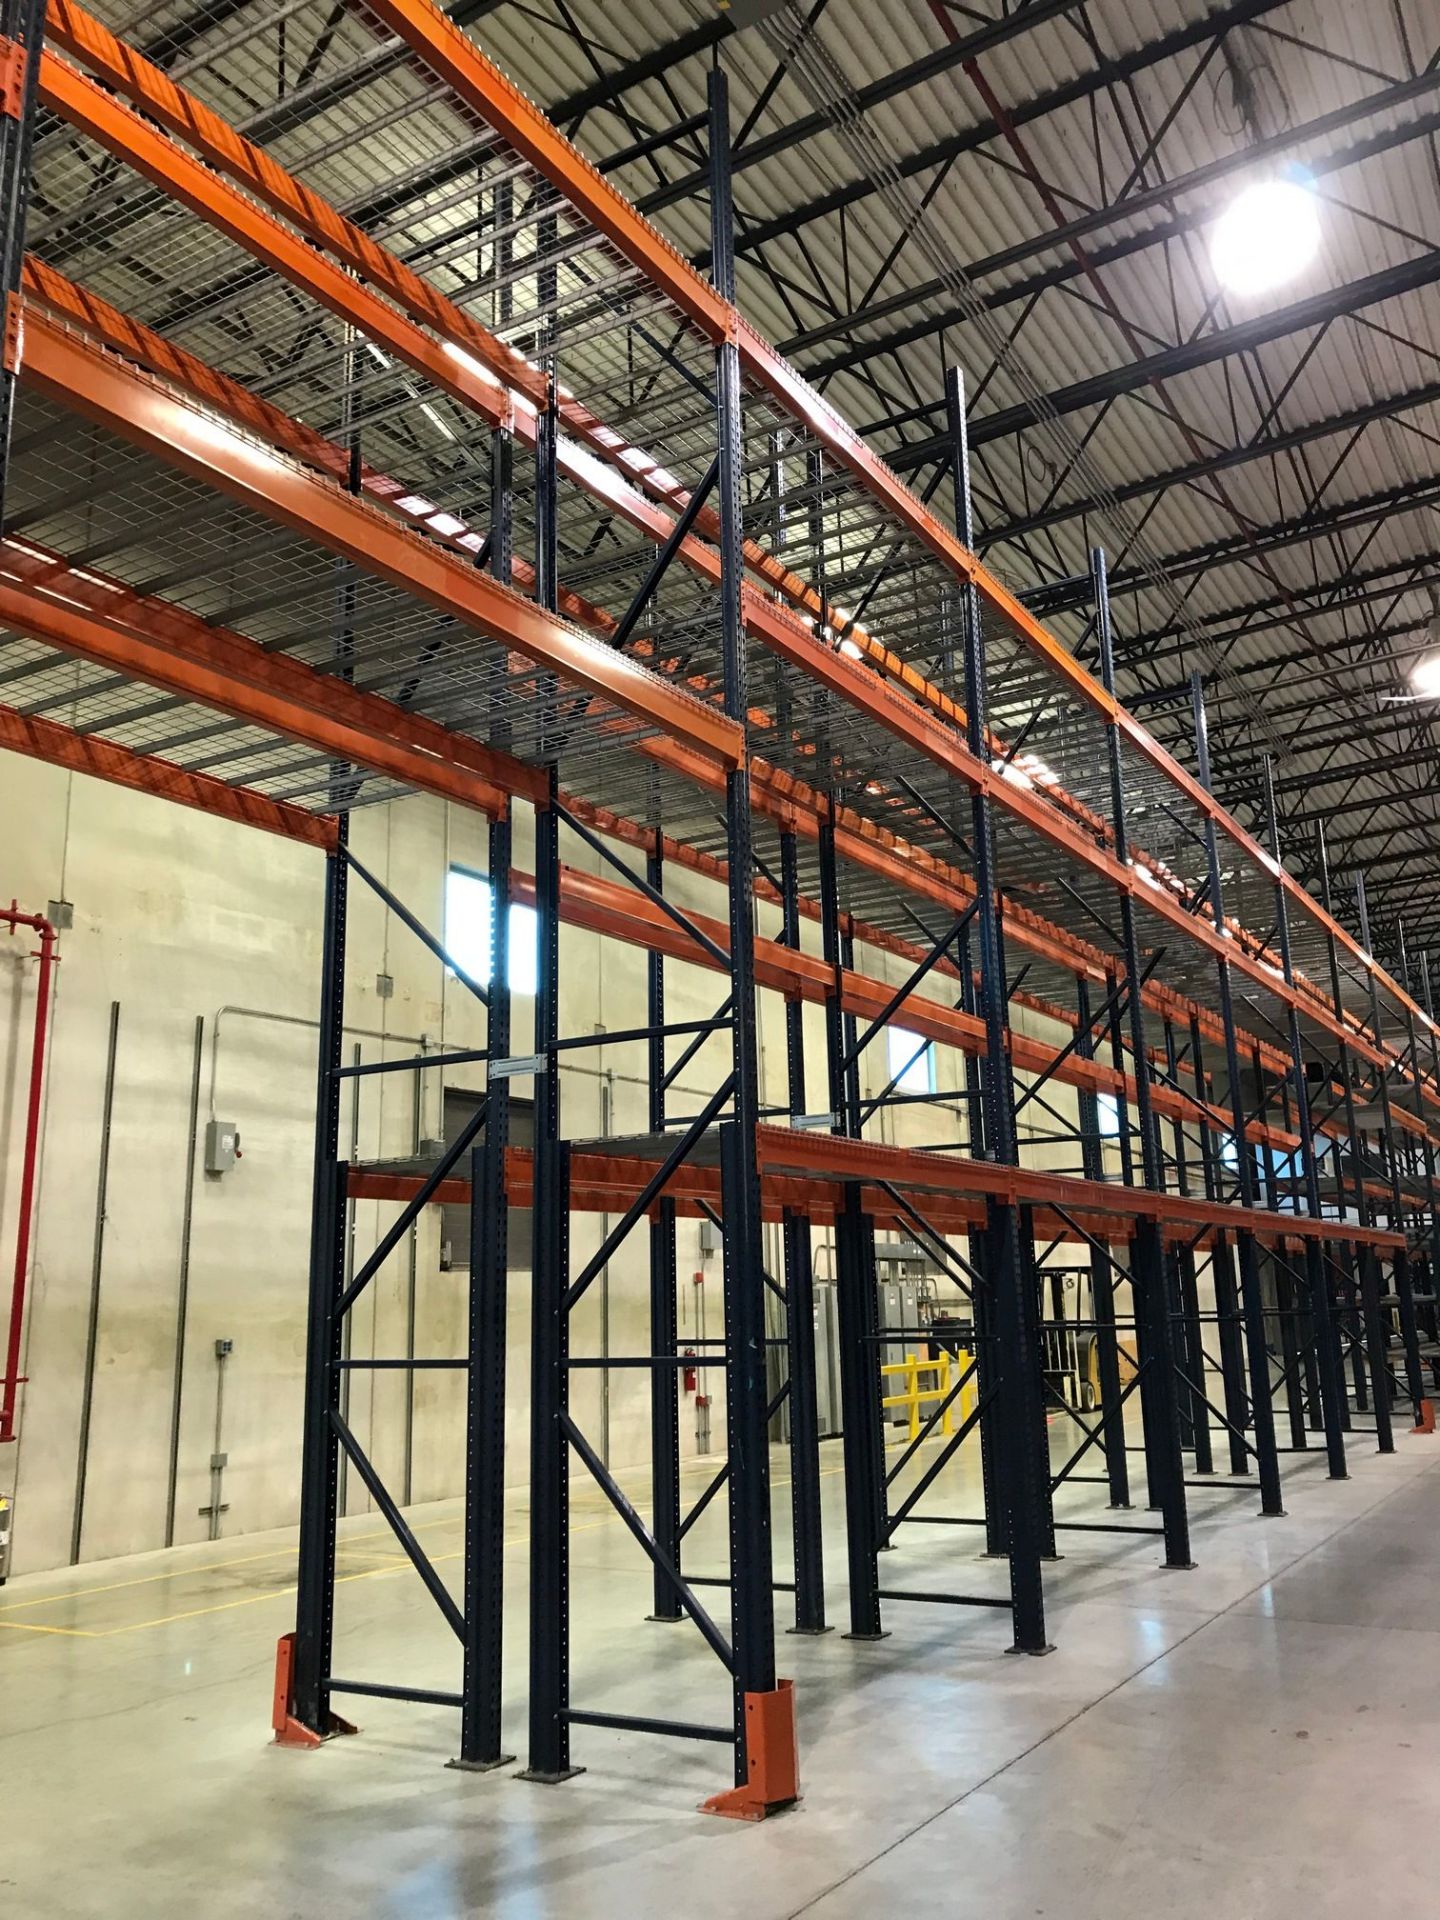 SECTIONS 60" X 108" X 288" TEARDROP TYPE ADJUSTABLE BEAM PALLET RACK WITH WIRE DECKING, 6" HIGH - Image 8 of 16